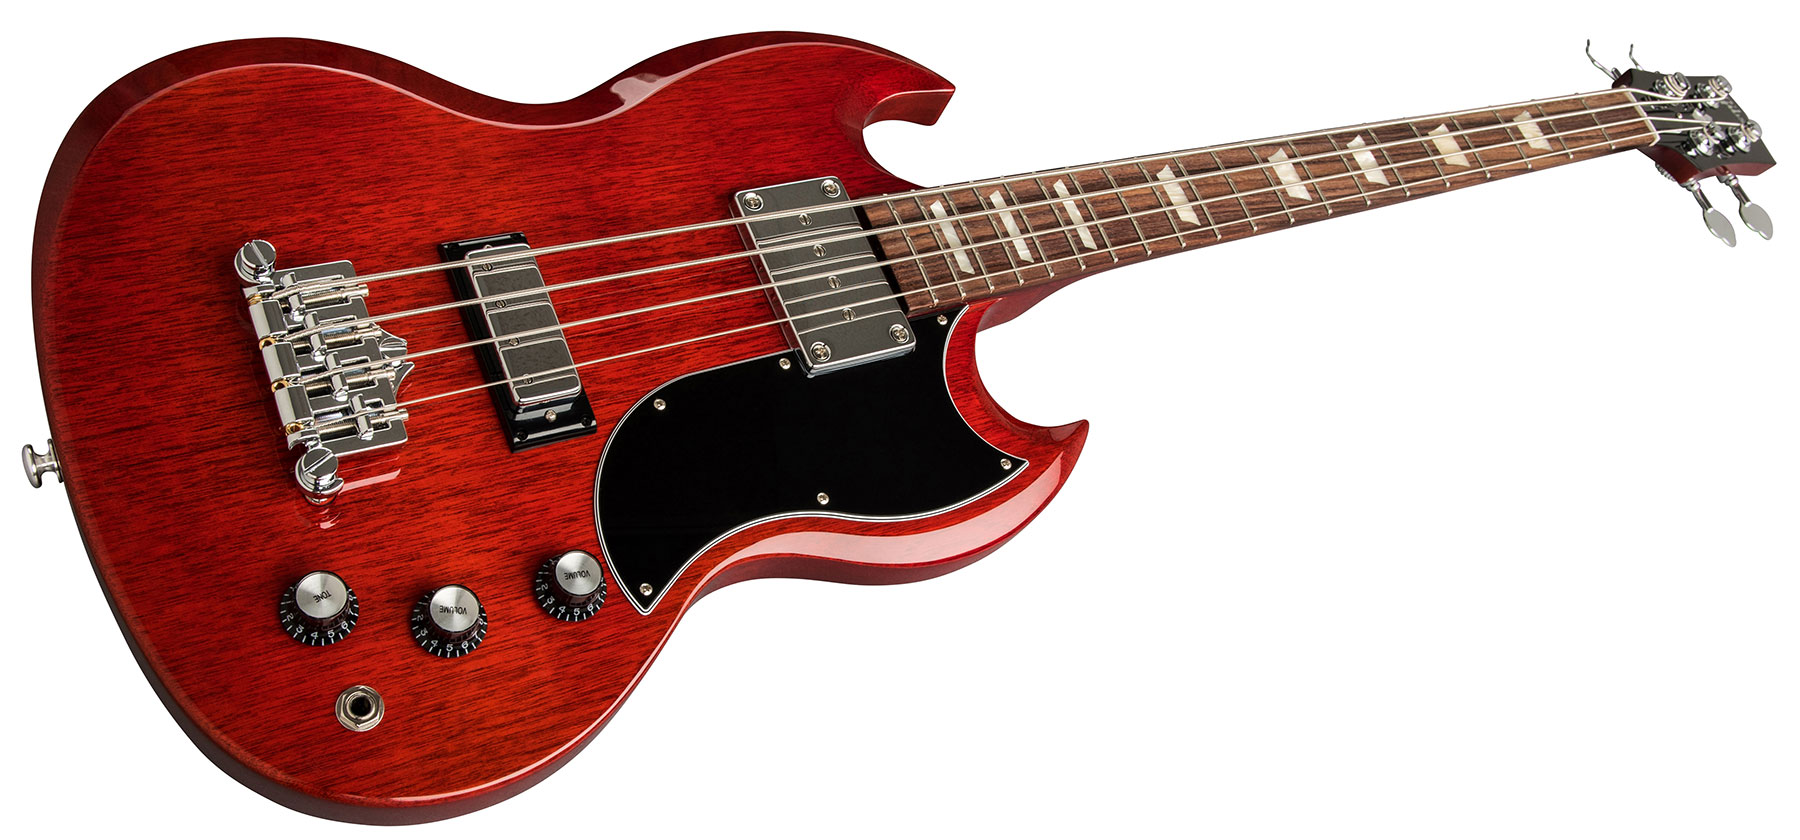 Gibson Sg Standard Bass - Heritage Cherry - Basse Électrique Solid Body - Variation 2